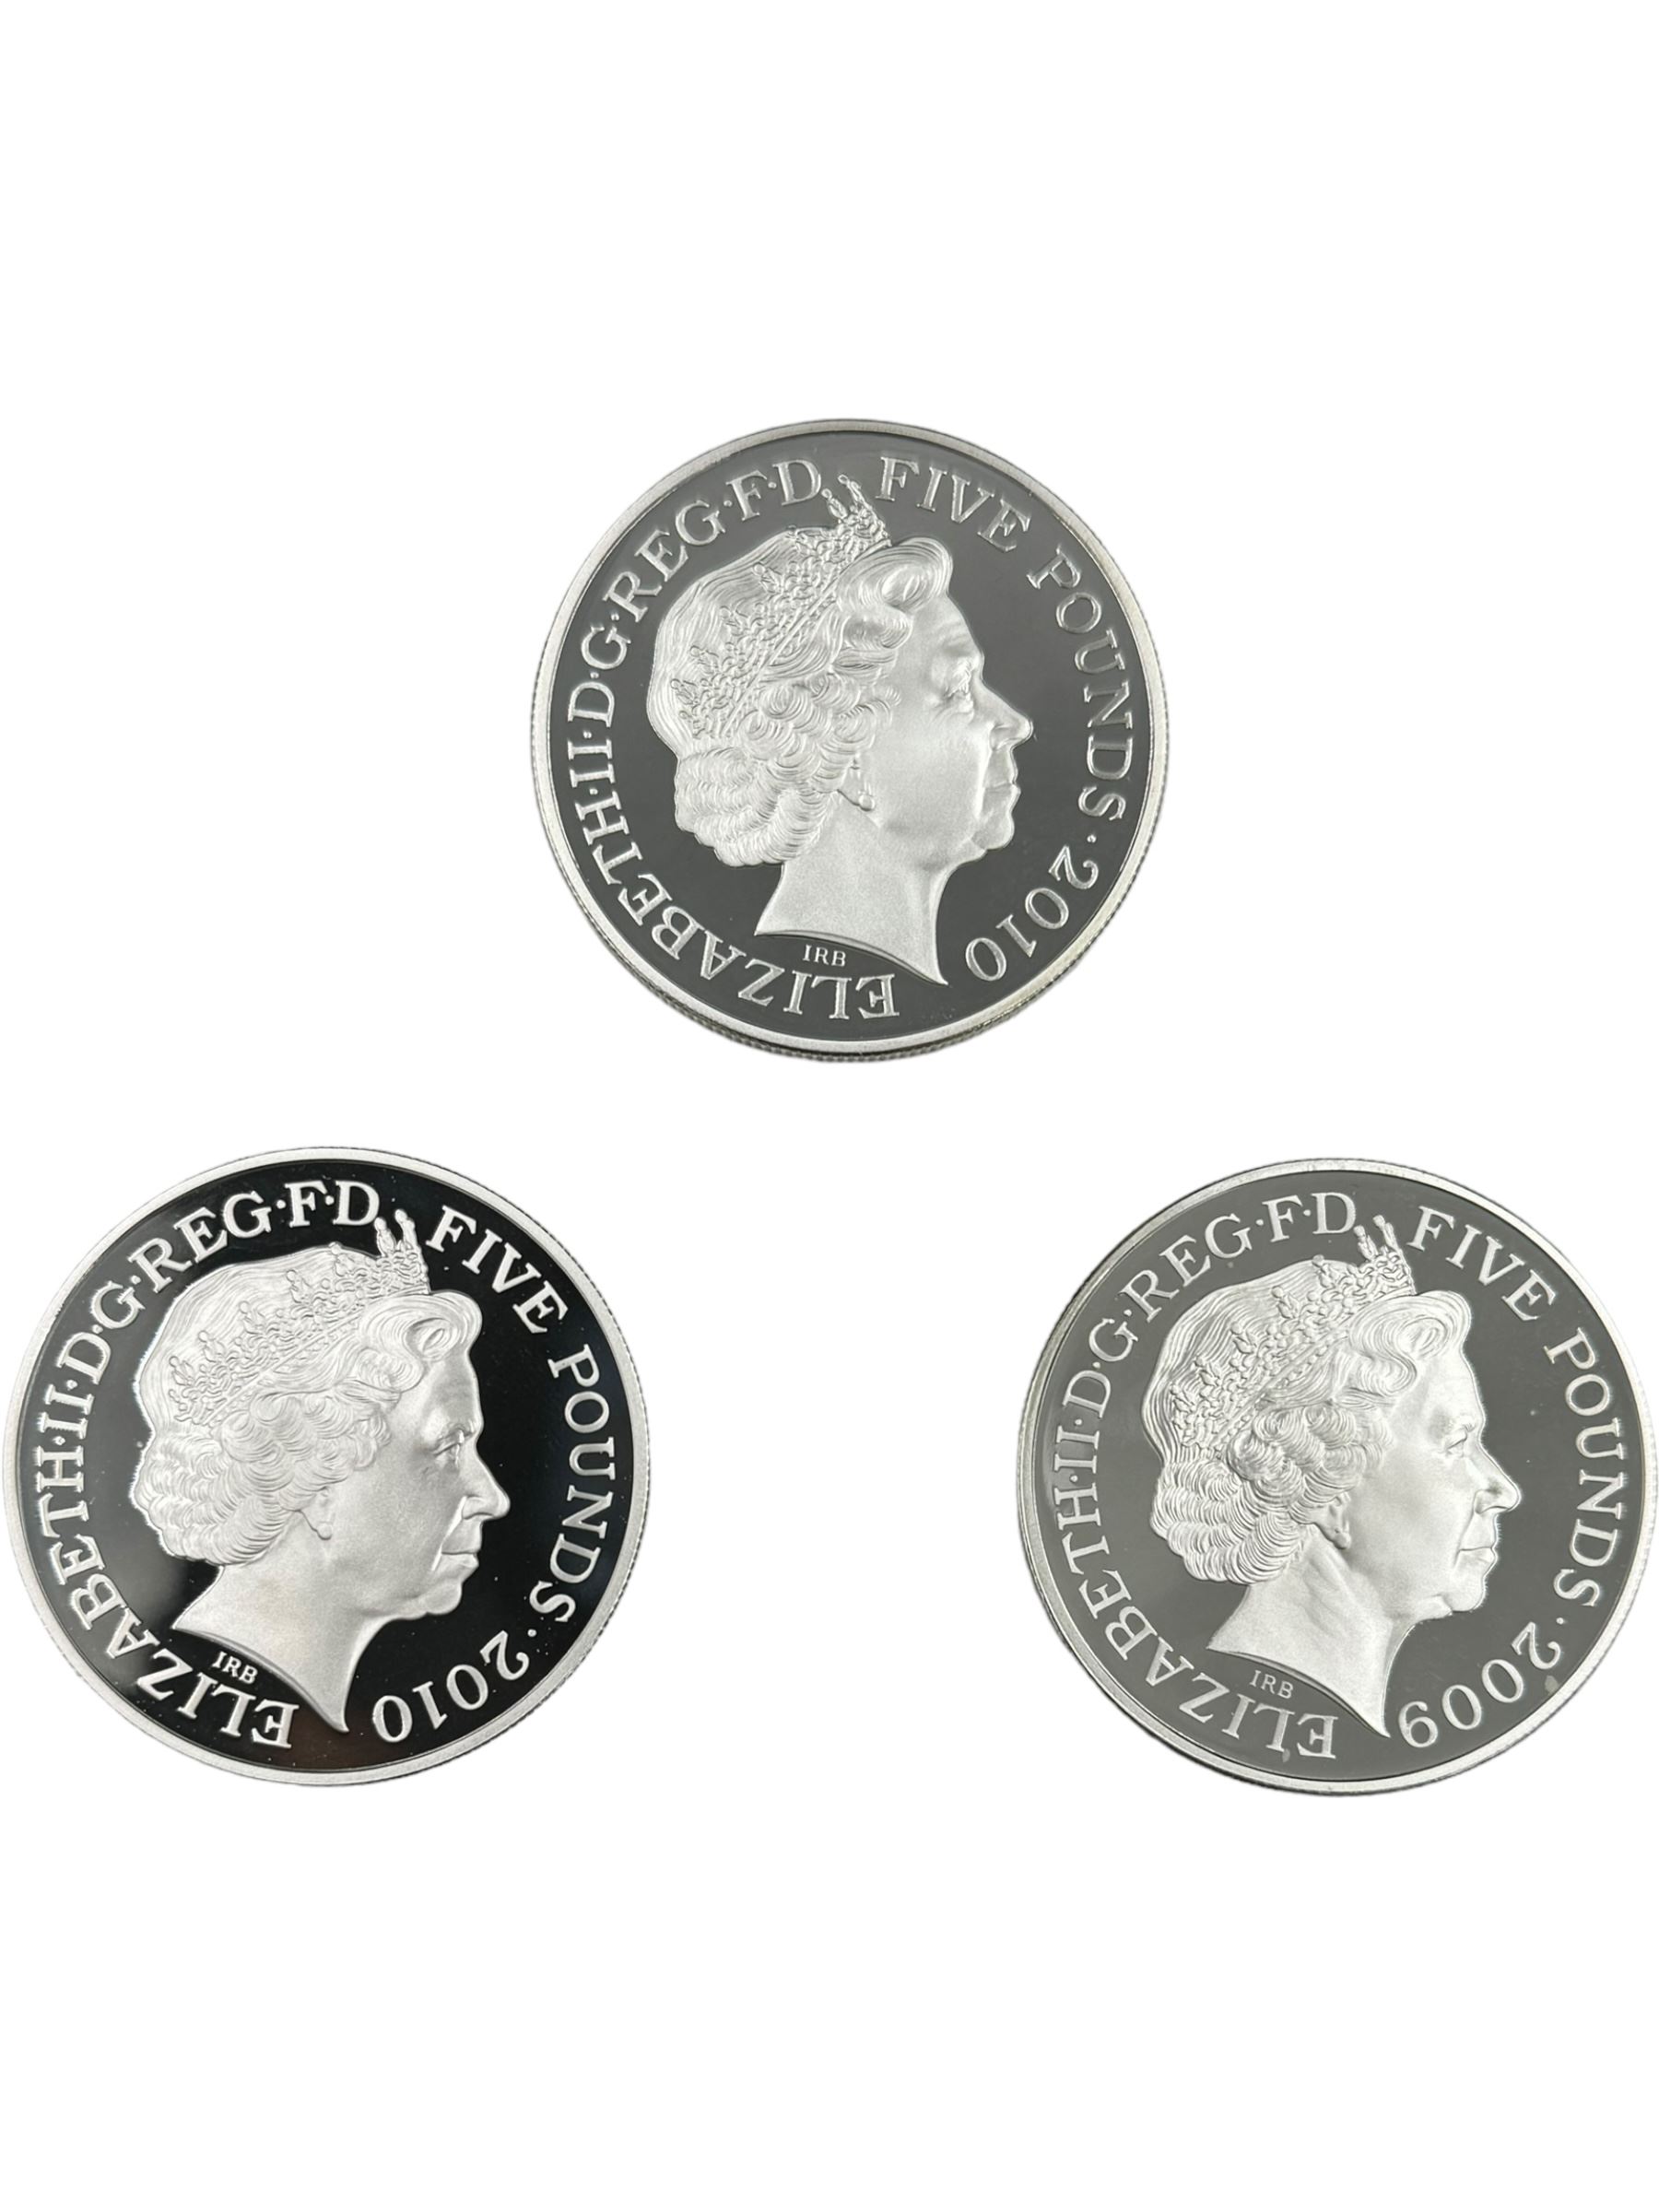 The Royal Mint United Kingdom 'A Celebration of Britain' silver proof coin set